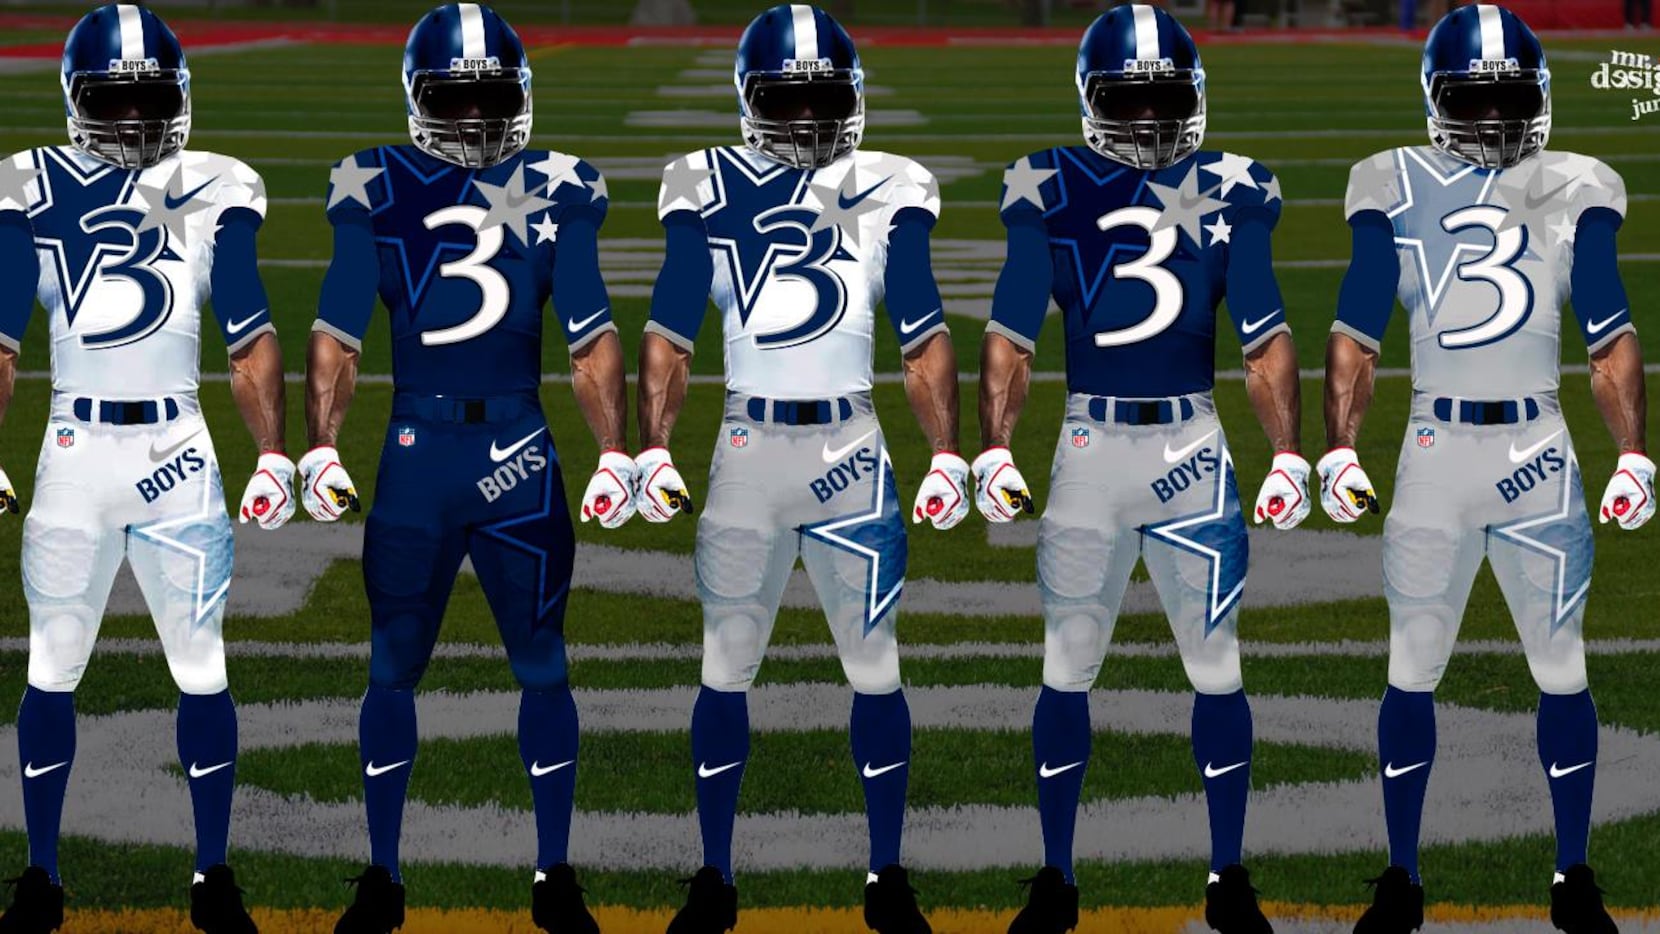 For those wanting to change the Dallas Cowboys' uniform, there's this